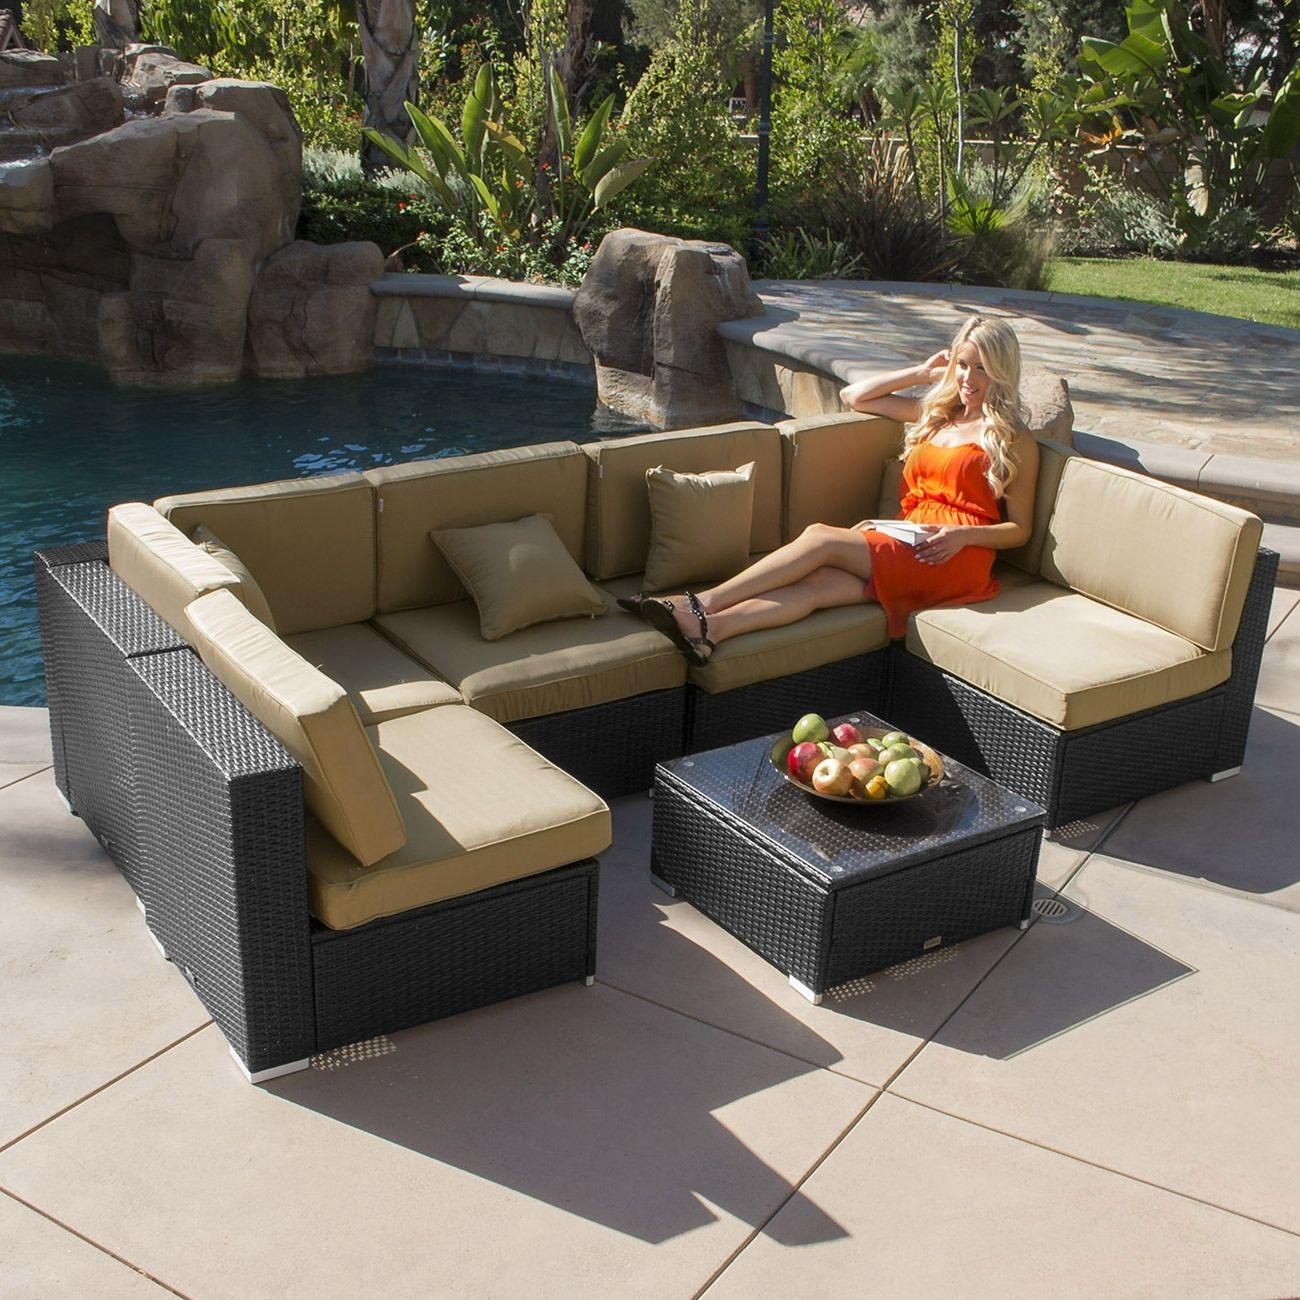 Current Trinidad And Tobago Sectional Sofas In 7pc Outdoor Patio Rattan Wicker Furniture Aluminum Sectional Sofa (View 17 of 20)